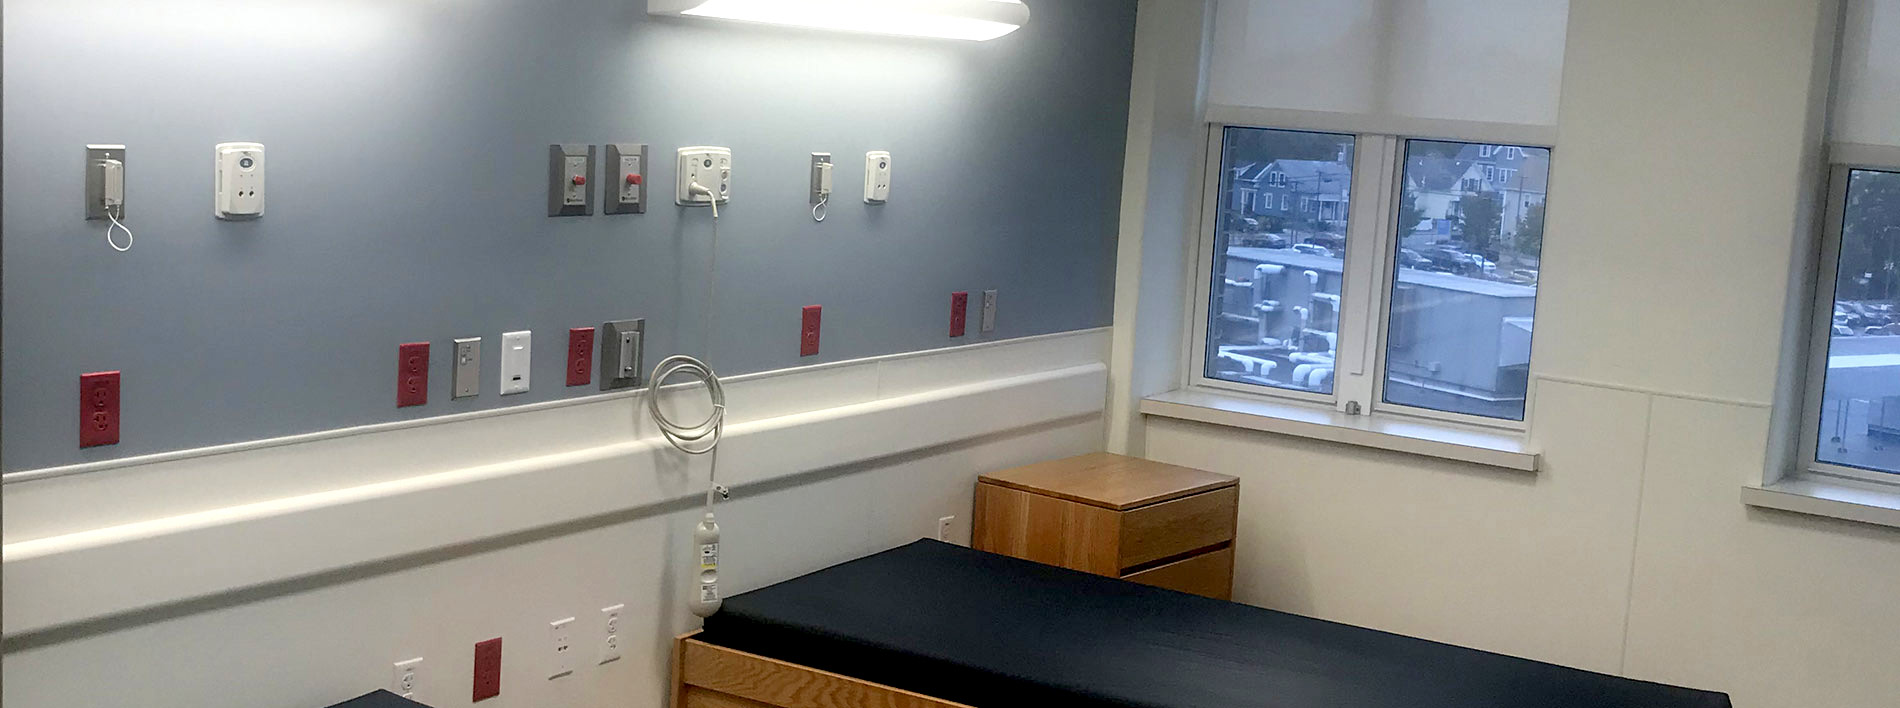 healthcare electrical installation